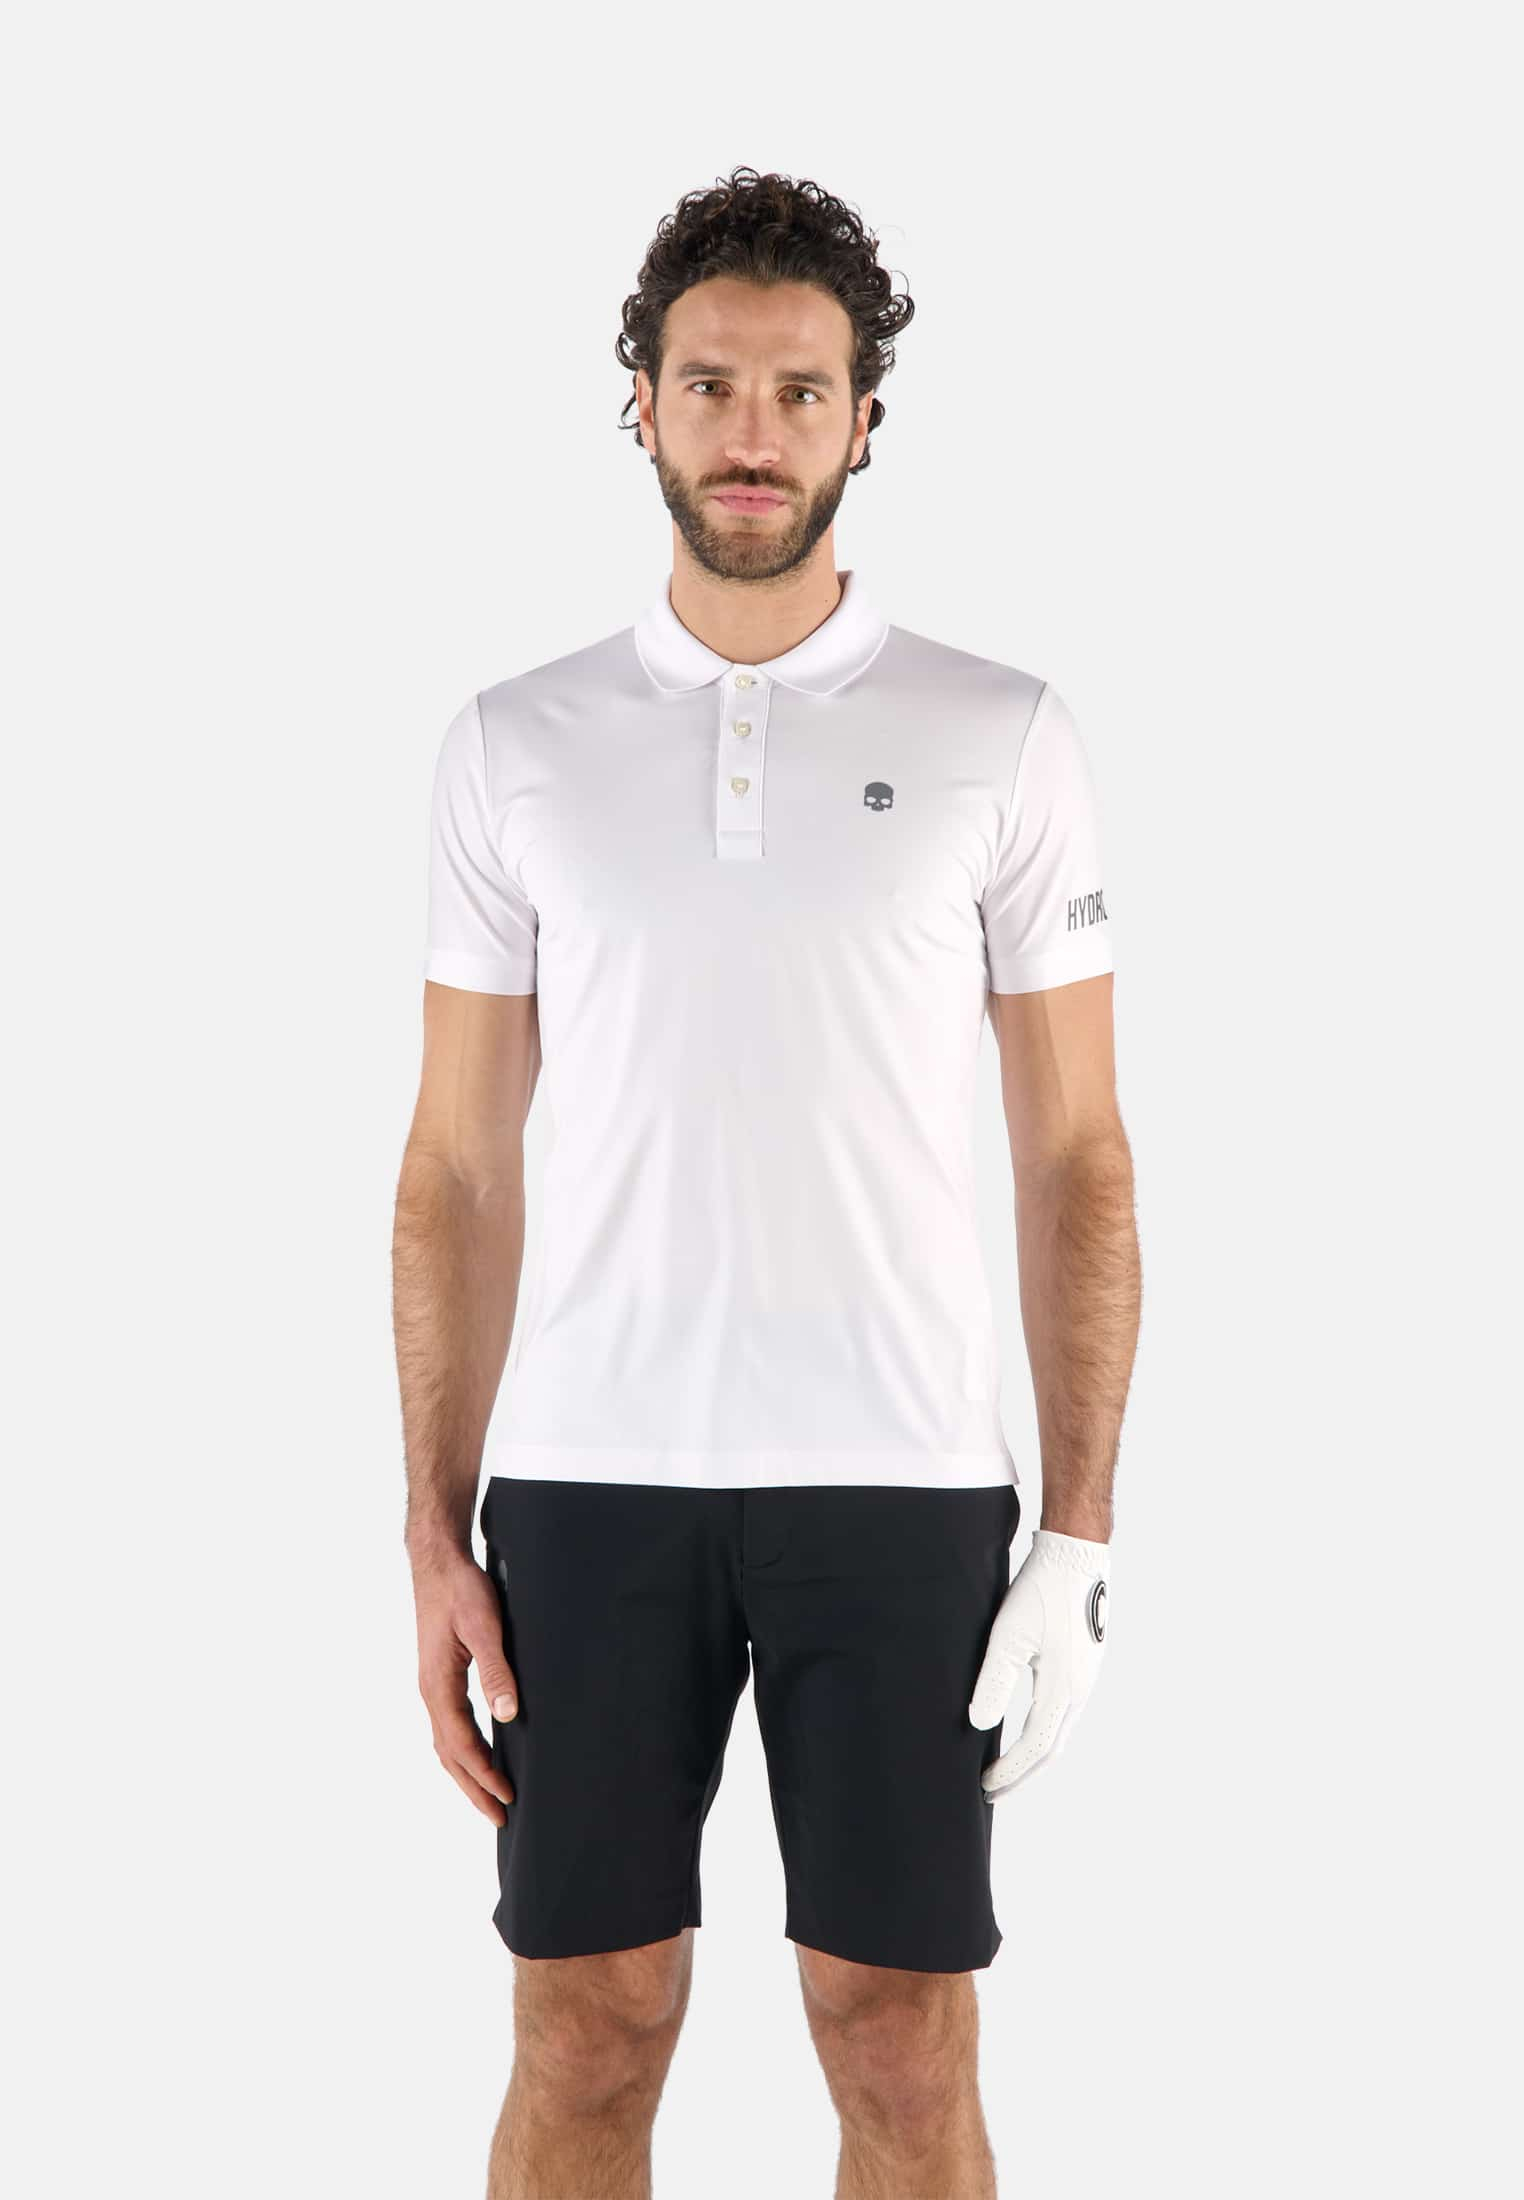 OVER GAME GOLF POLO COMFORT - Outlet Hydrogen - Luxury Sportwear